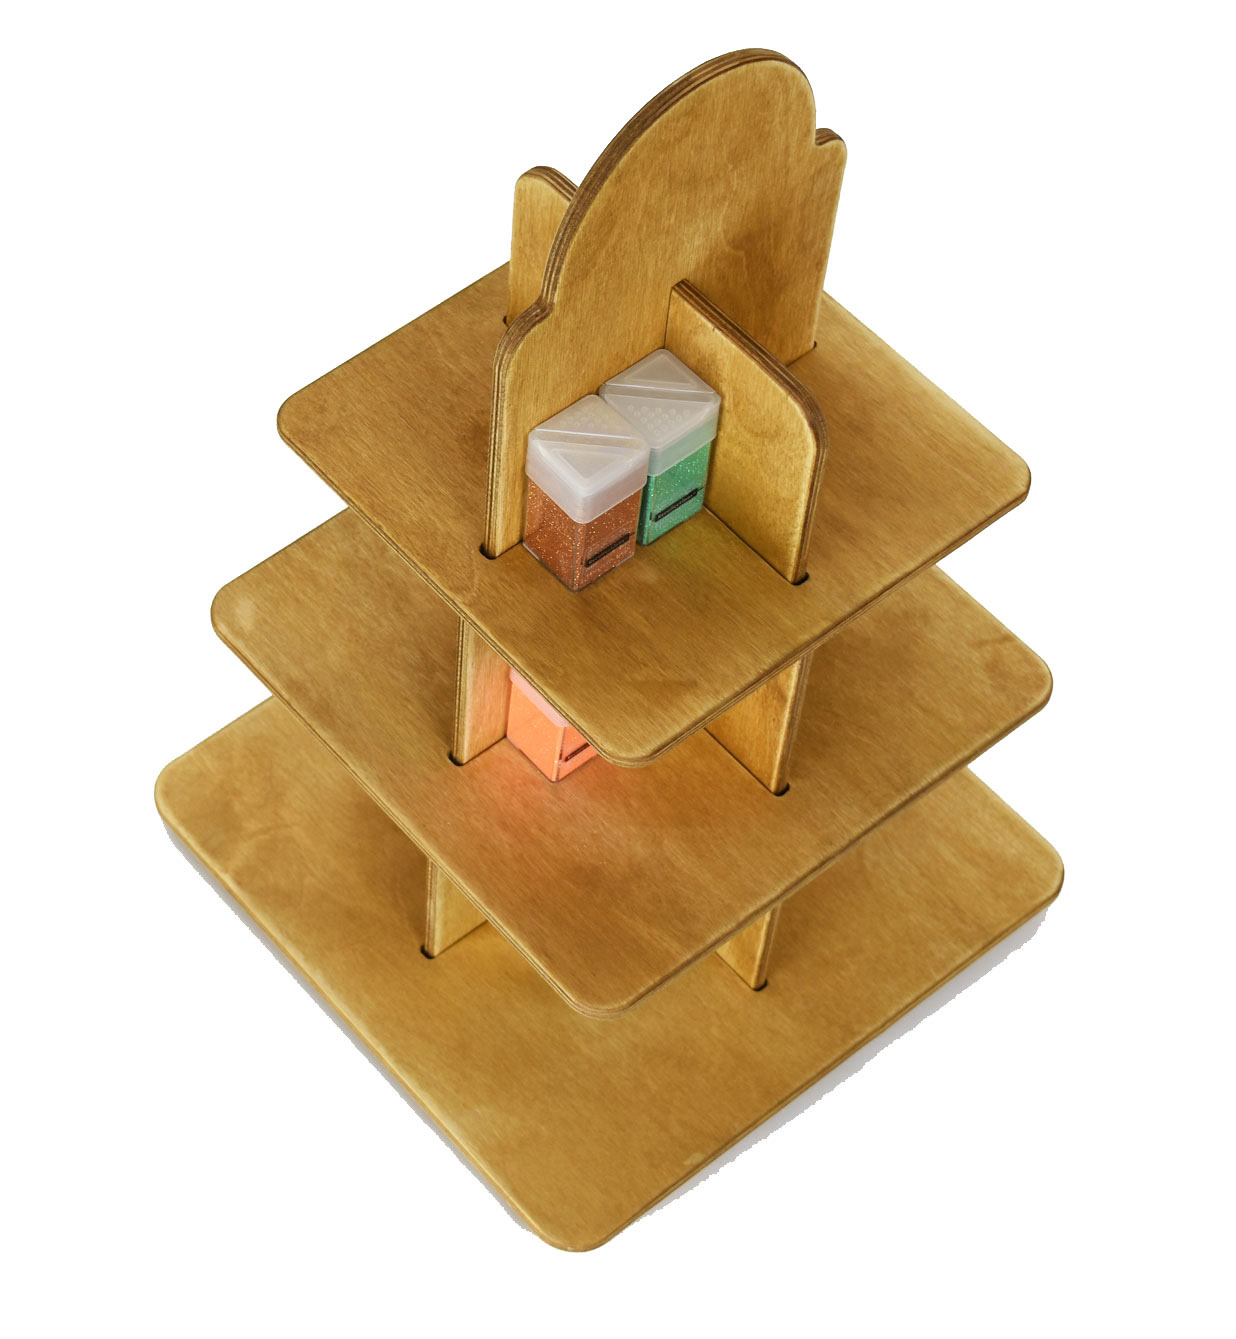 Counter Rack 3 tiers, Perfect for Displaying a Variety of Small Items - SKU: 420